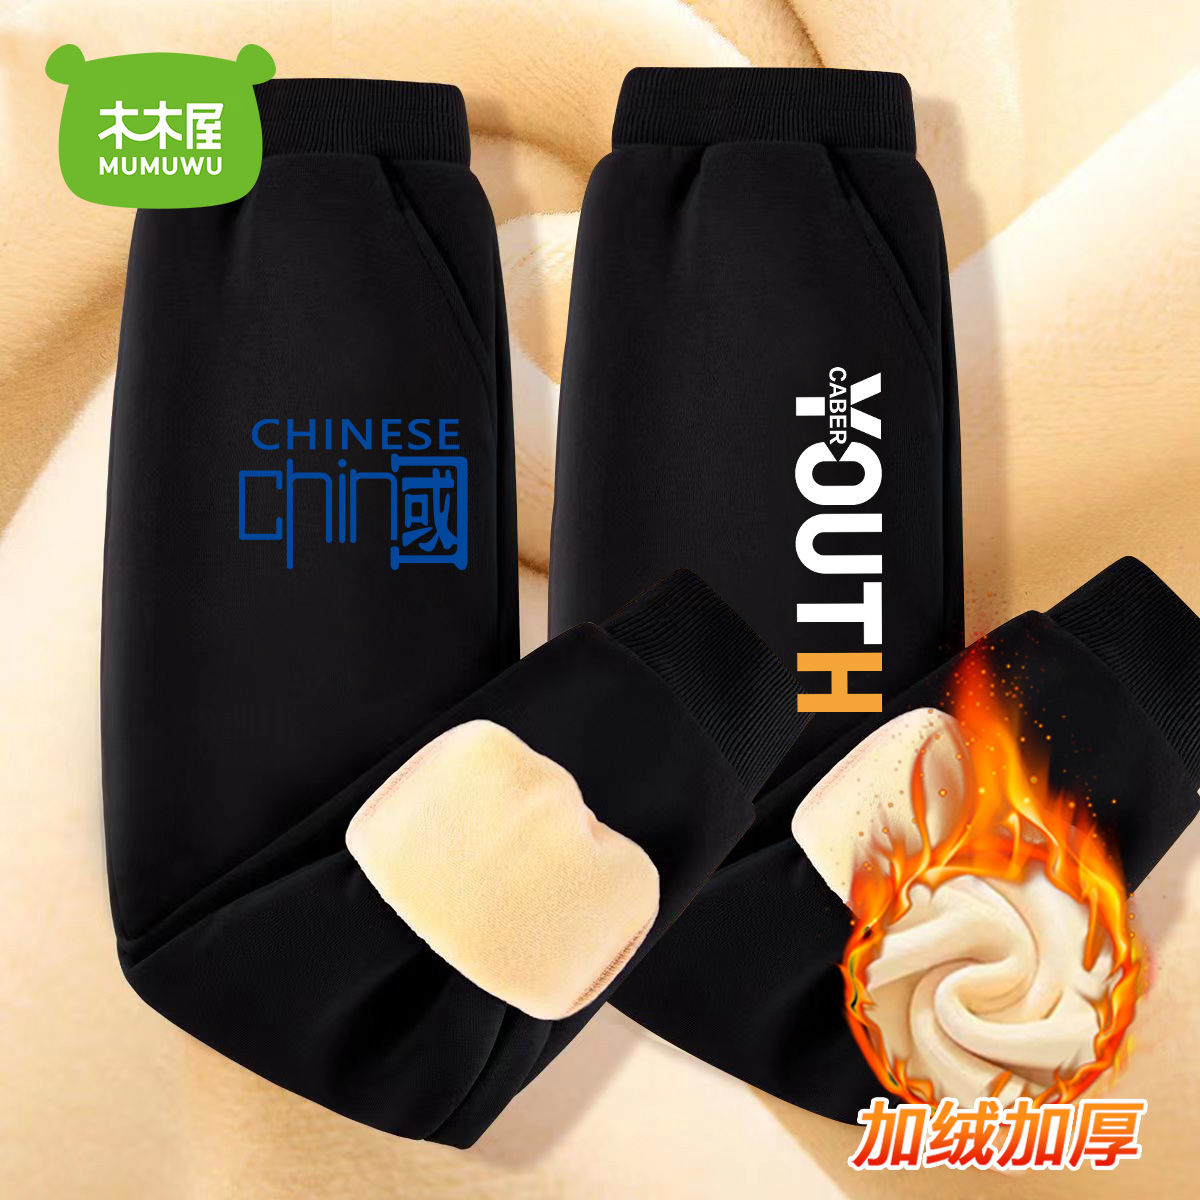 Boys' fleece pants winter all-in-one  new outer wear thickened sports cotton pants boys and children's clothing children's winter clothing